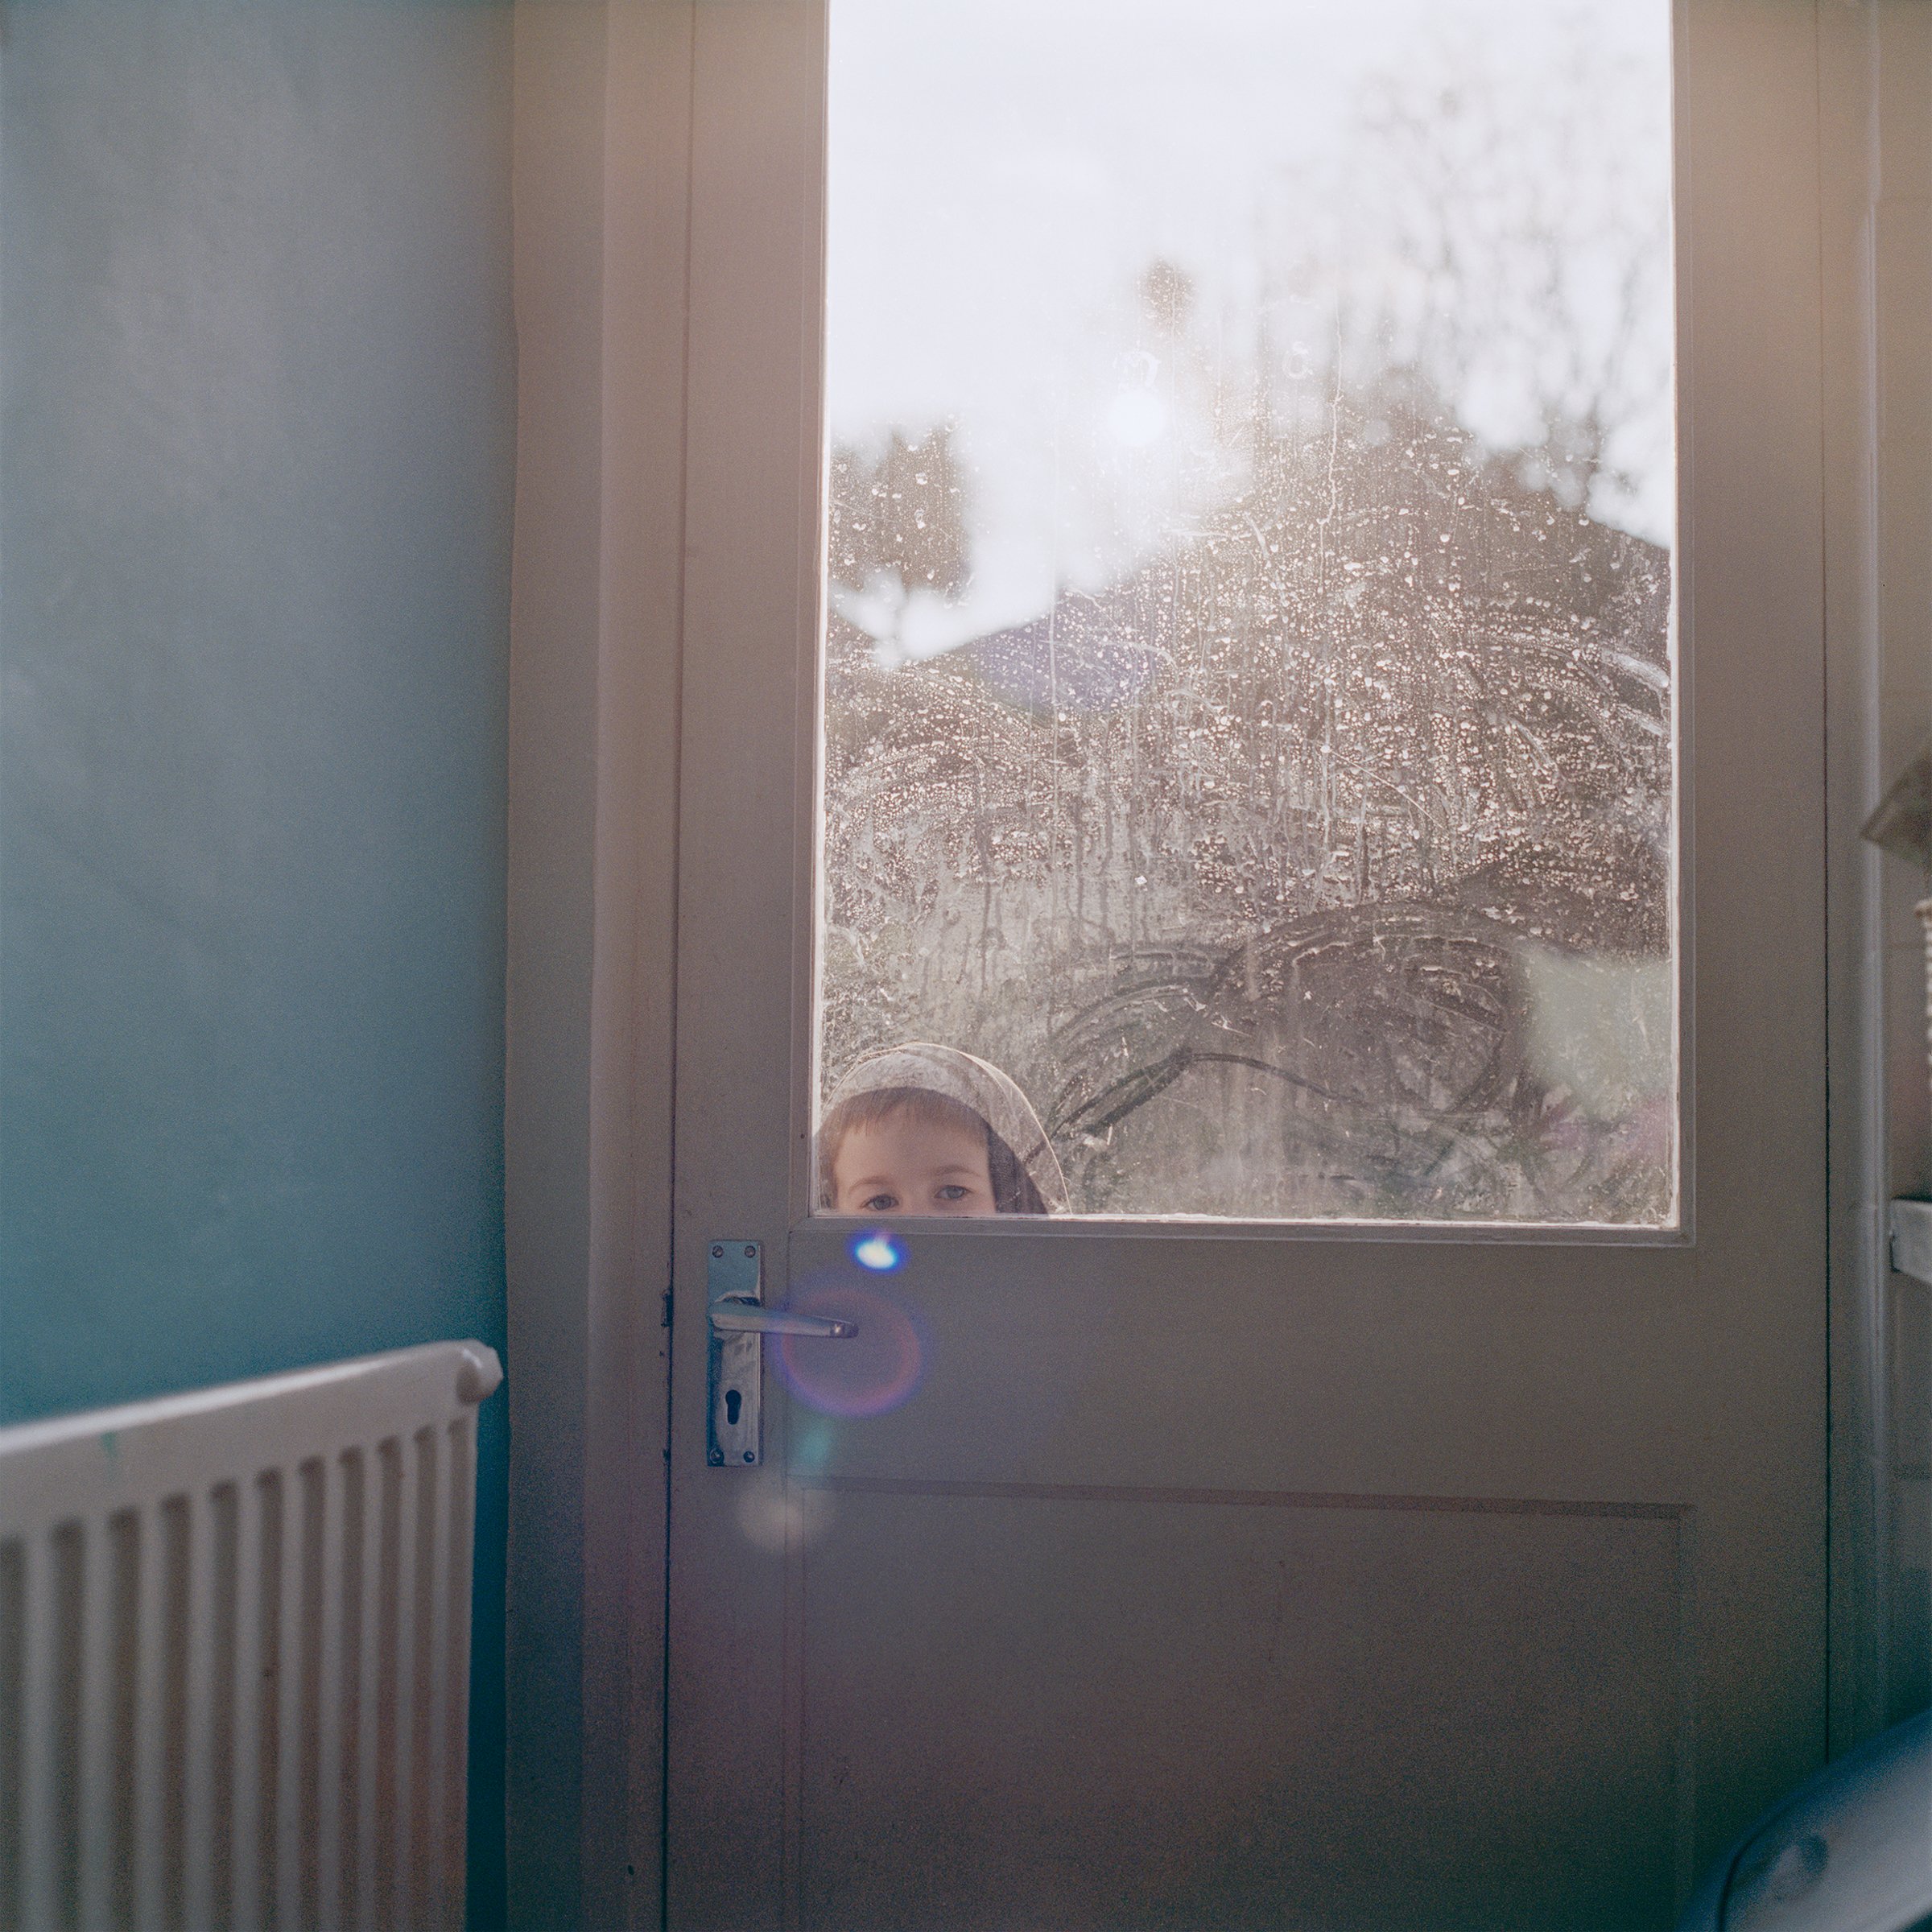 from the series Domestic Drift; © Clare Gallagher | No Place Like Home: The Domestic in Irish Photography | Thursday 20 July – Saturday 2 September 2023 | Photo Museum Ireland | Image: from the series Domestic Drift, © Clare Gallagher – from inside, we see what is probably the back door of a house; there may be rain on the window of the door, though there’s a hazy sun visible; we just see the eyes and top of the head of a child looking in through that window 